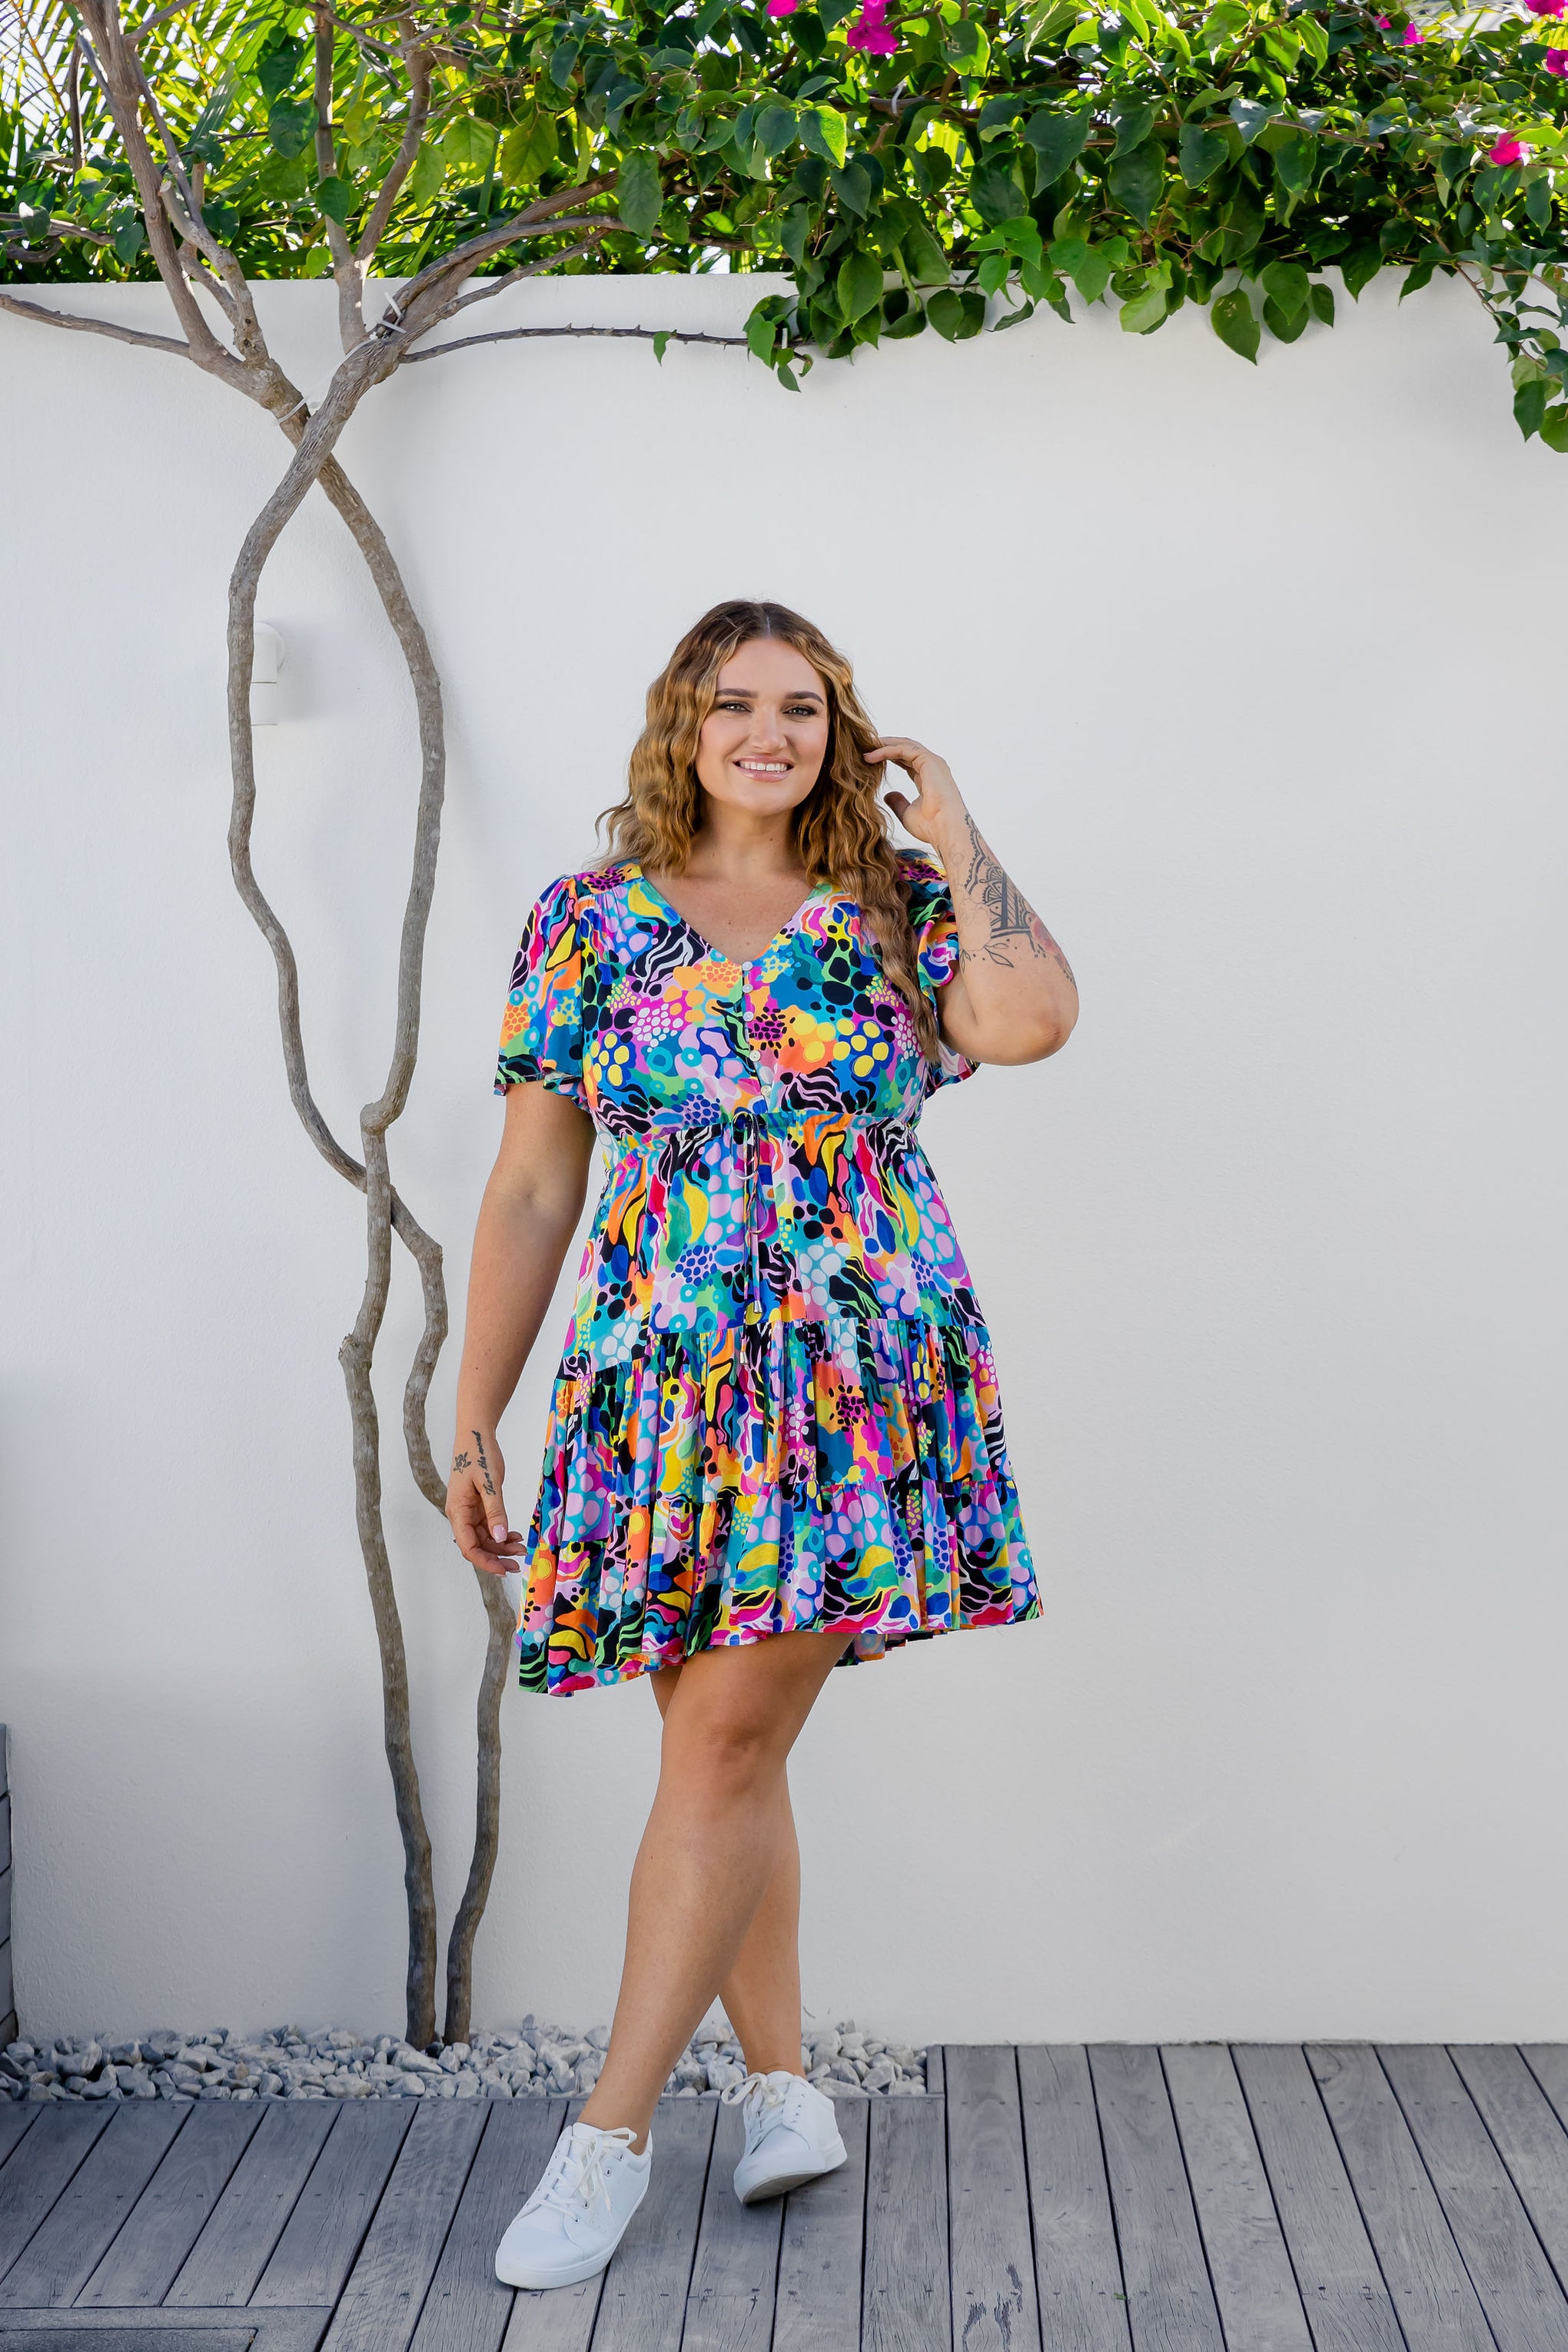 Charlie Dress in Electric Zee by Kasey Rainbow